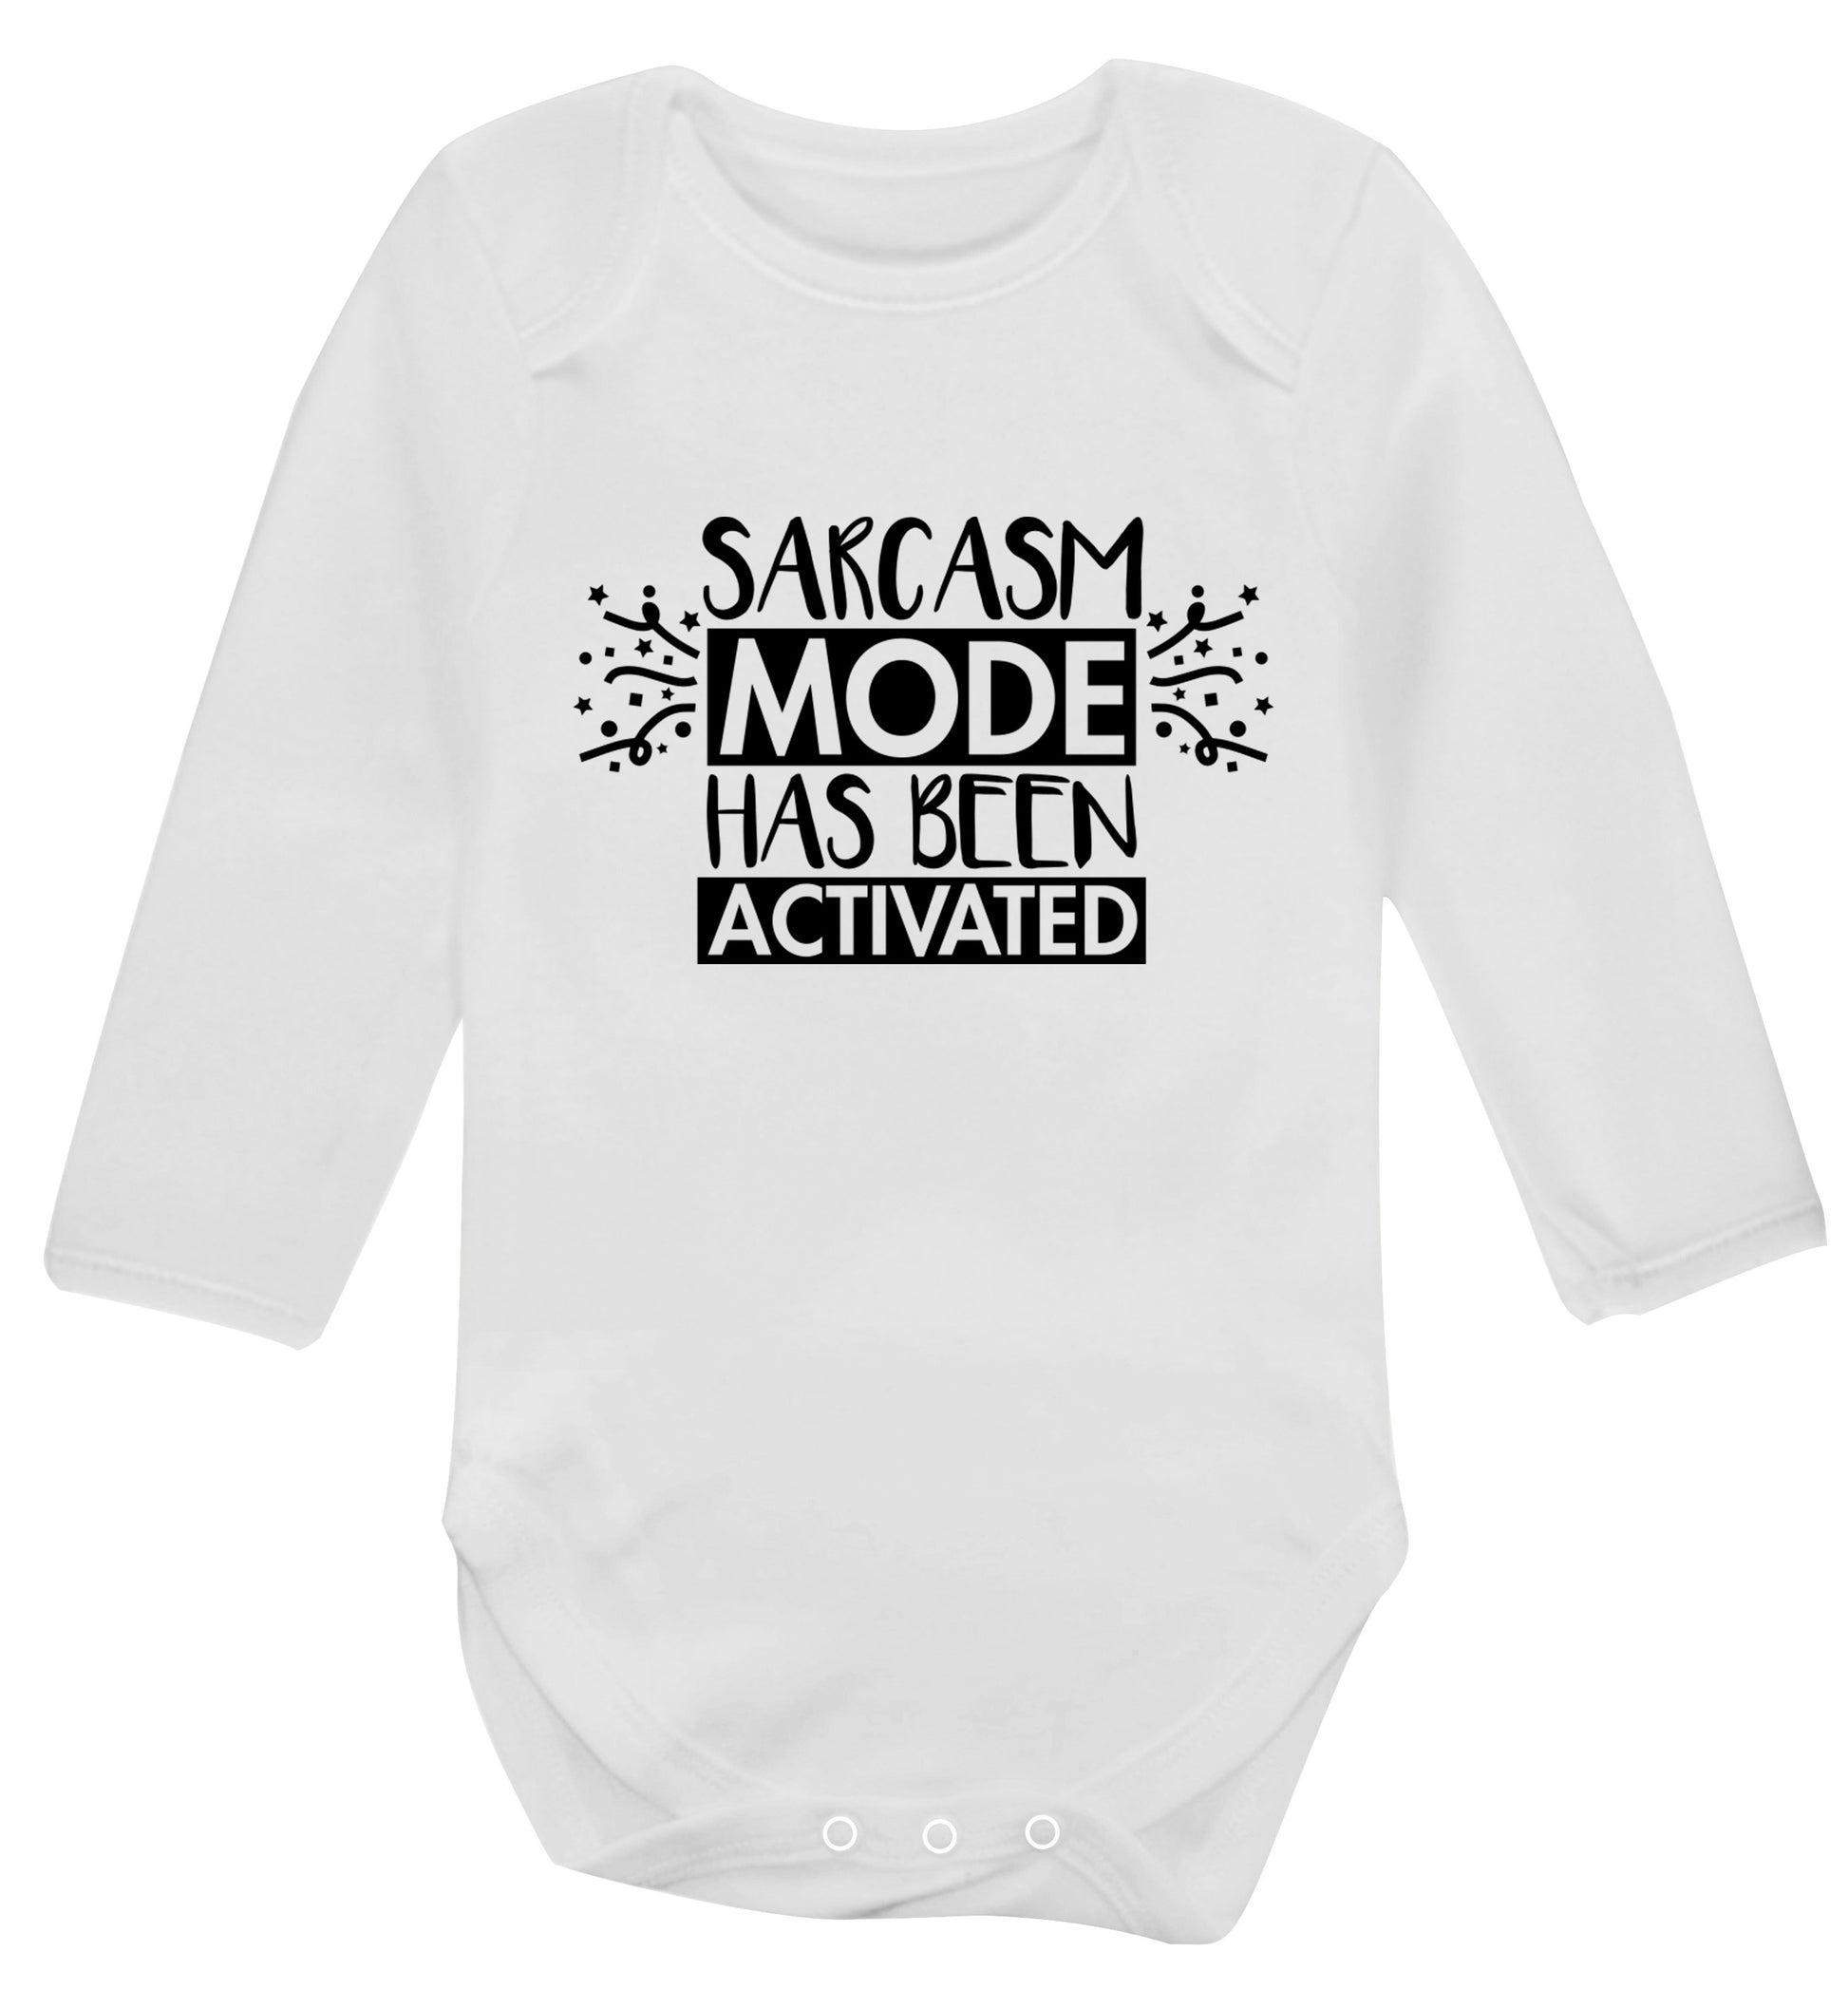 Sarcarsm mode has been activated Baby Vest long sleeved white 6-12 months